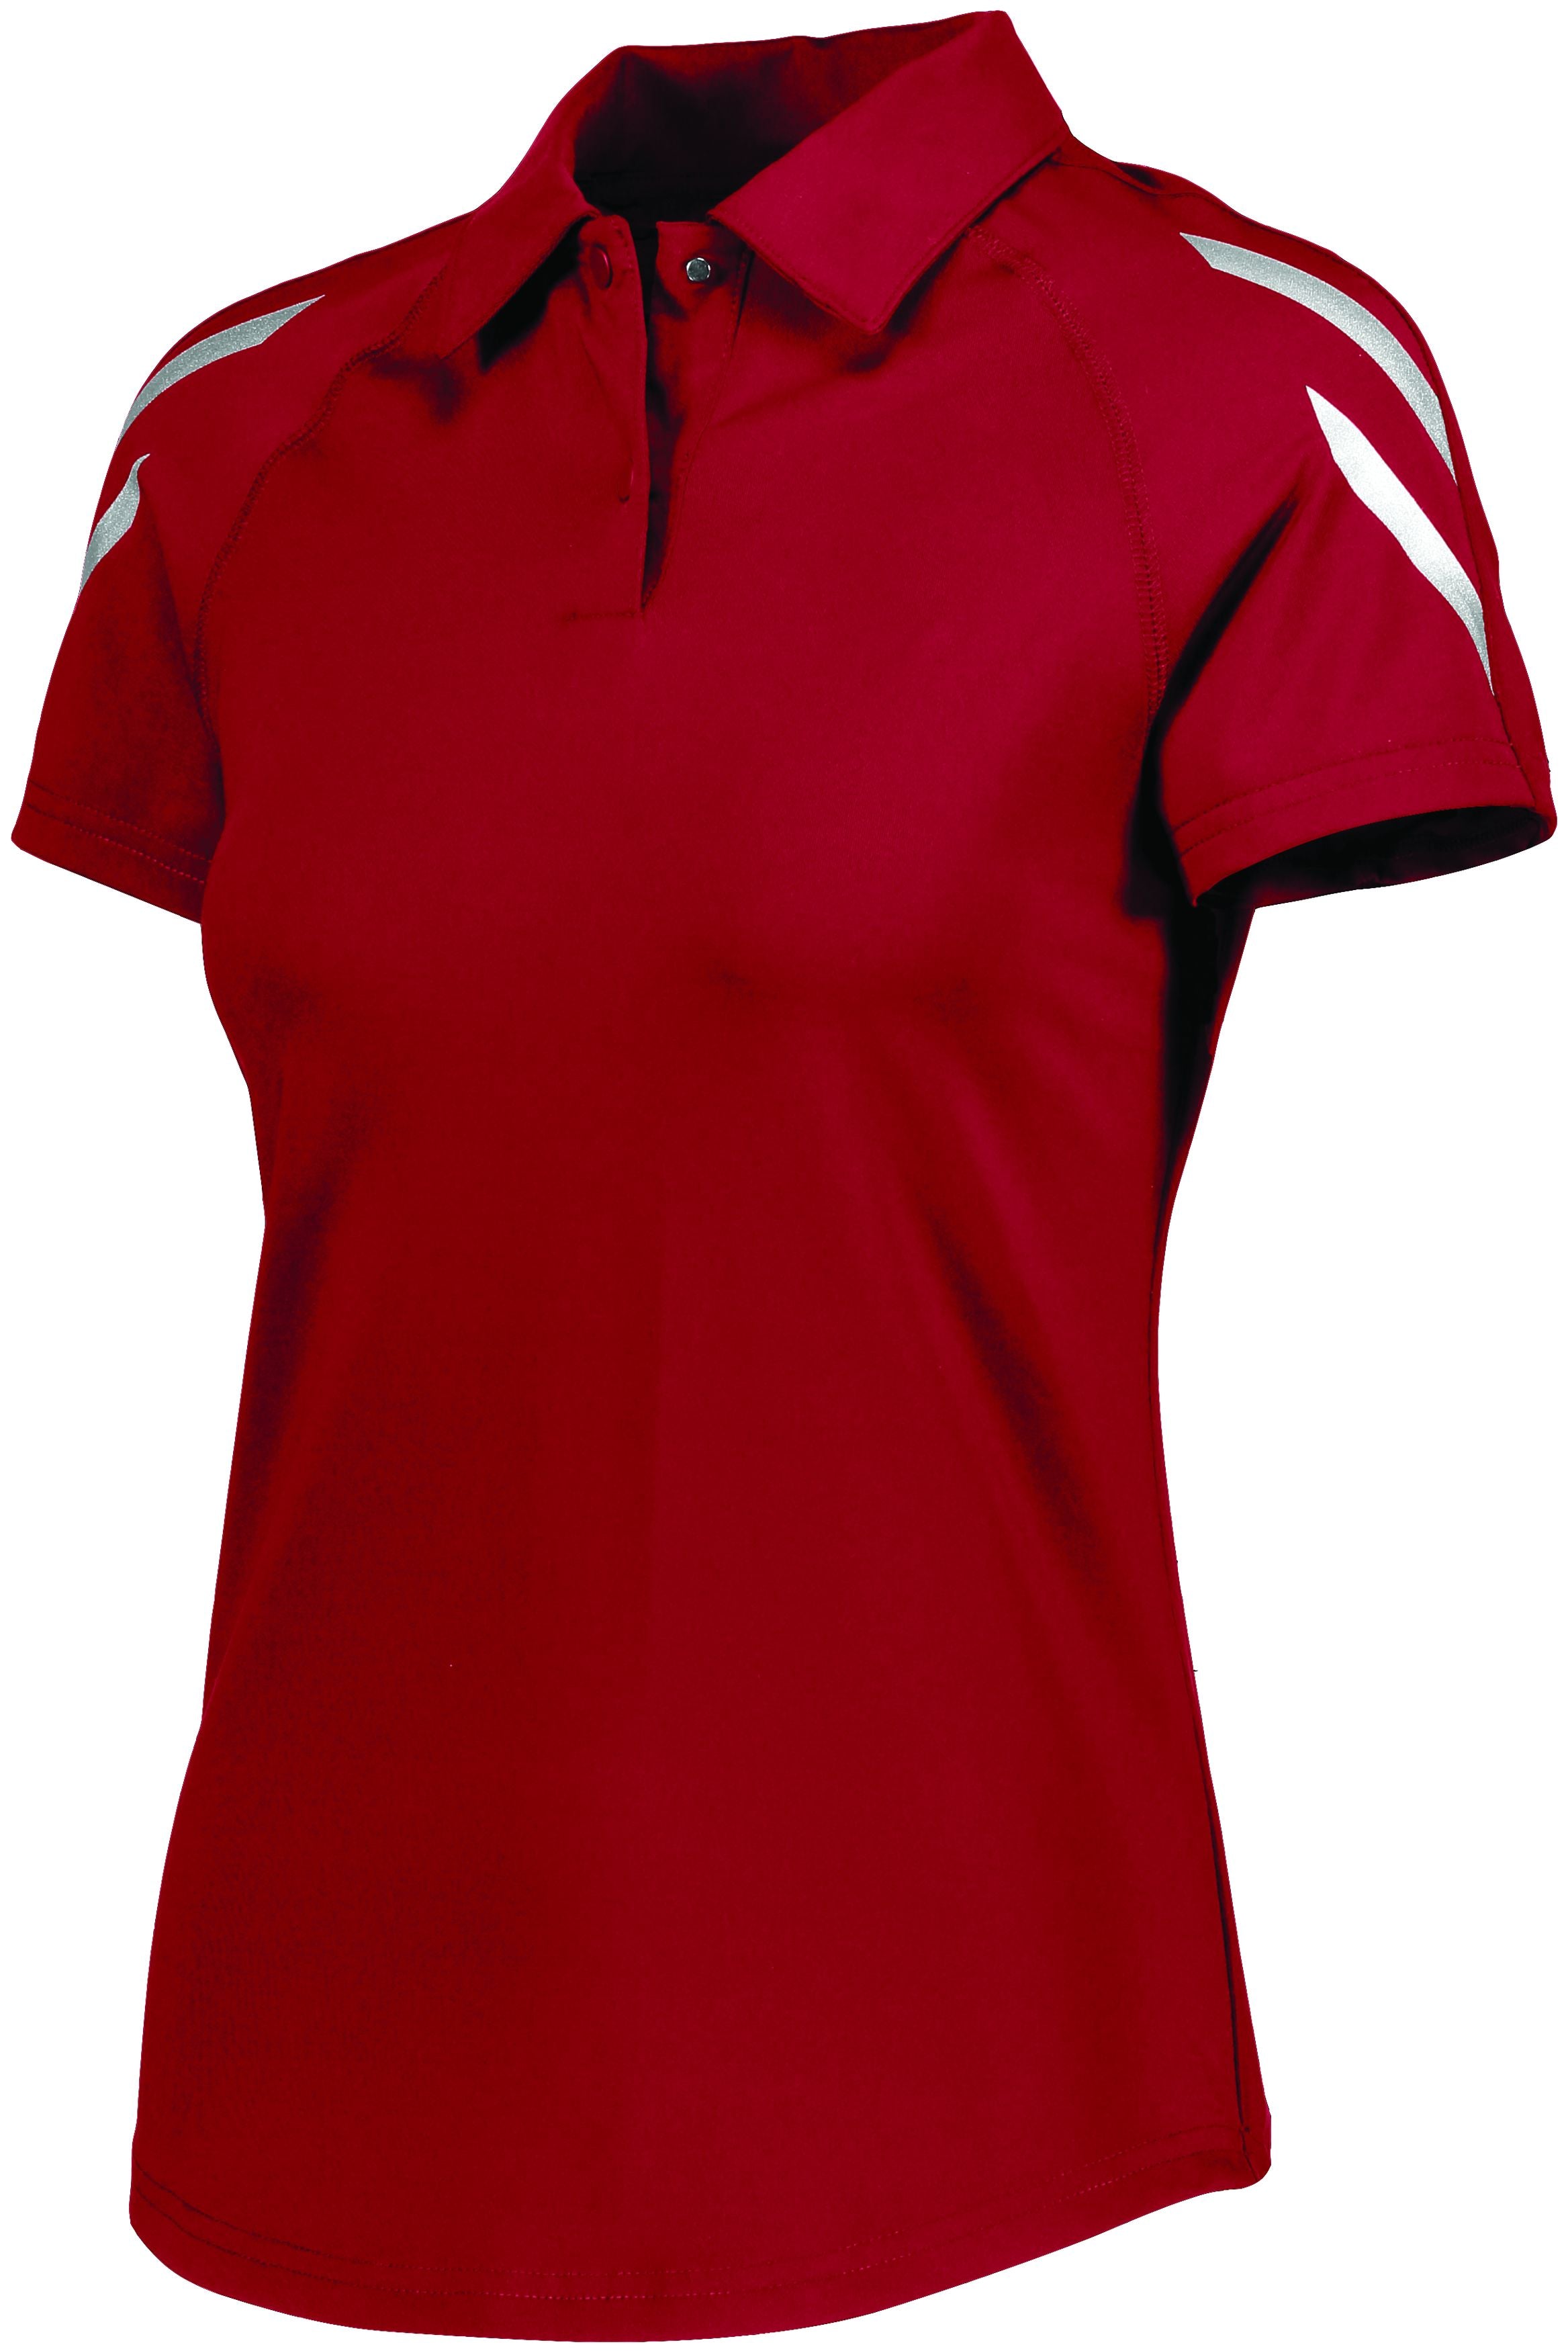 Holloway Ladies Flux Polo in Scarlet  -Part of the Ladies, Ladies-Polo, Polos, Holloway, Shirts, Flux-Collection, Corporate-Collection product lines at KanaleyCreations.com